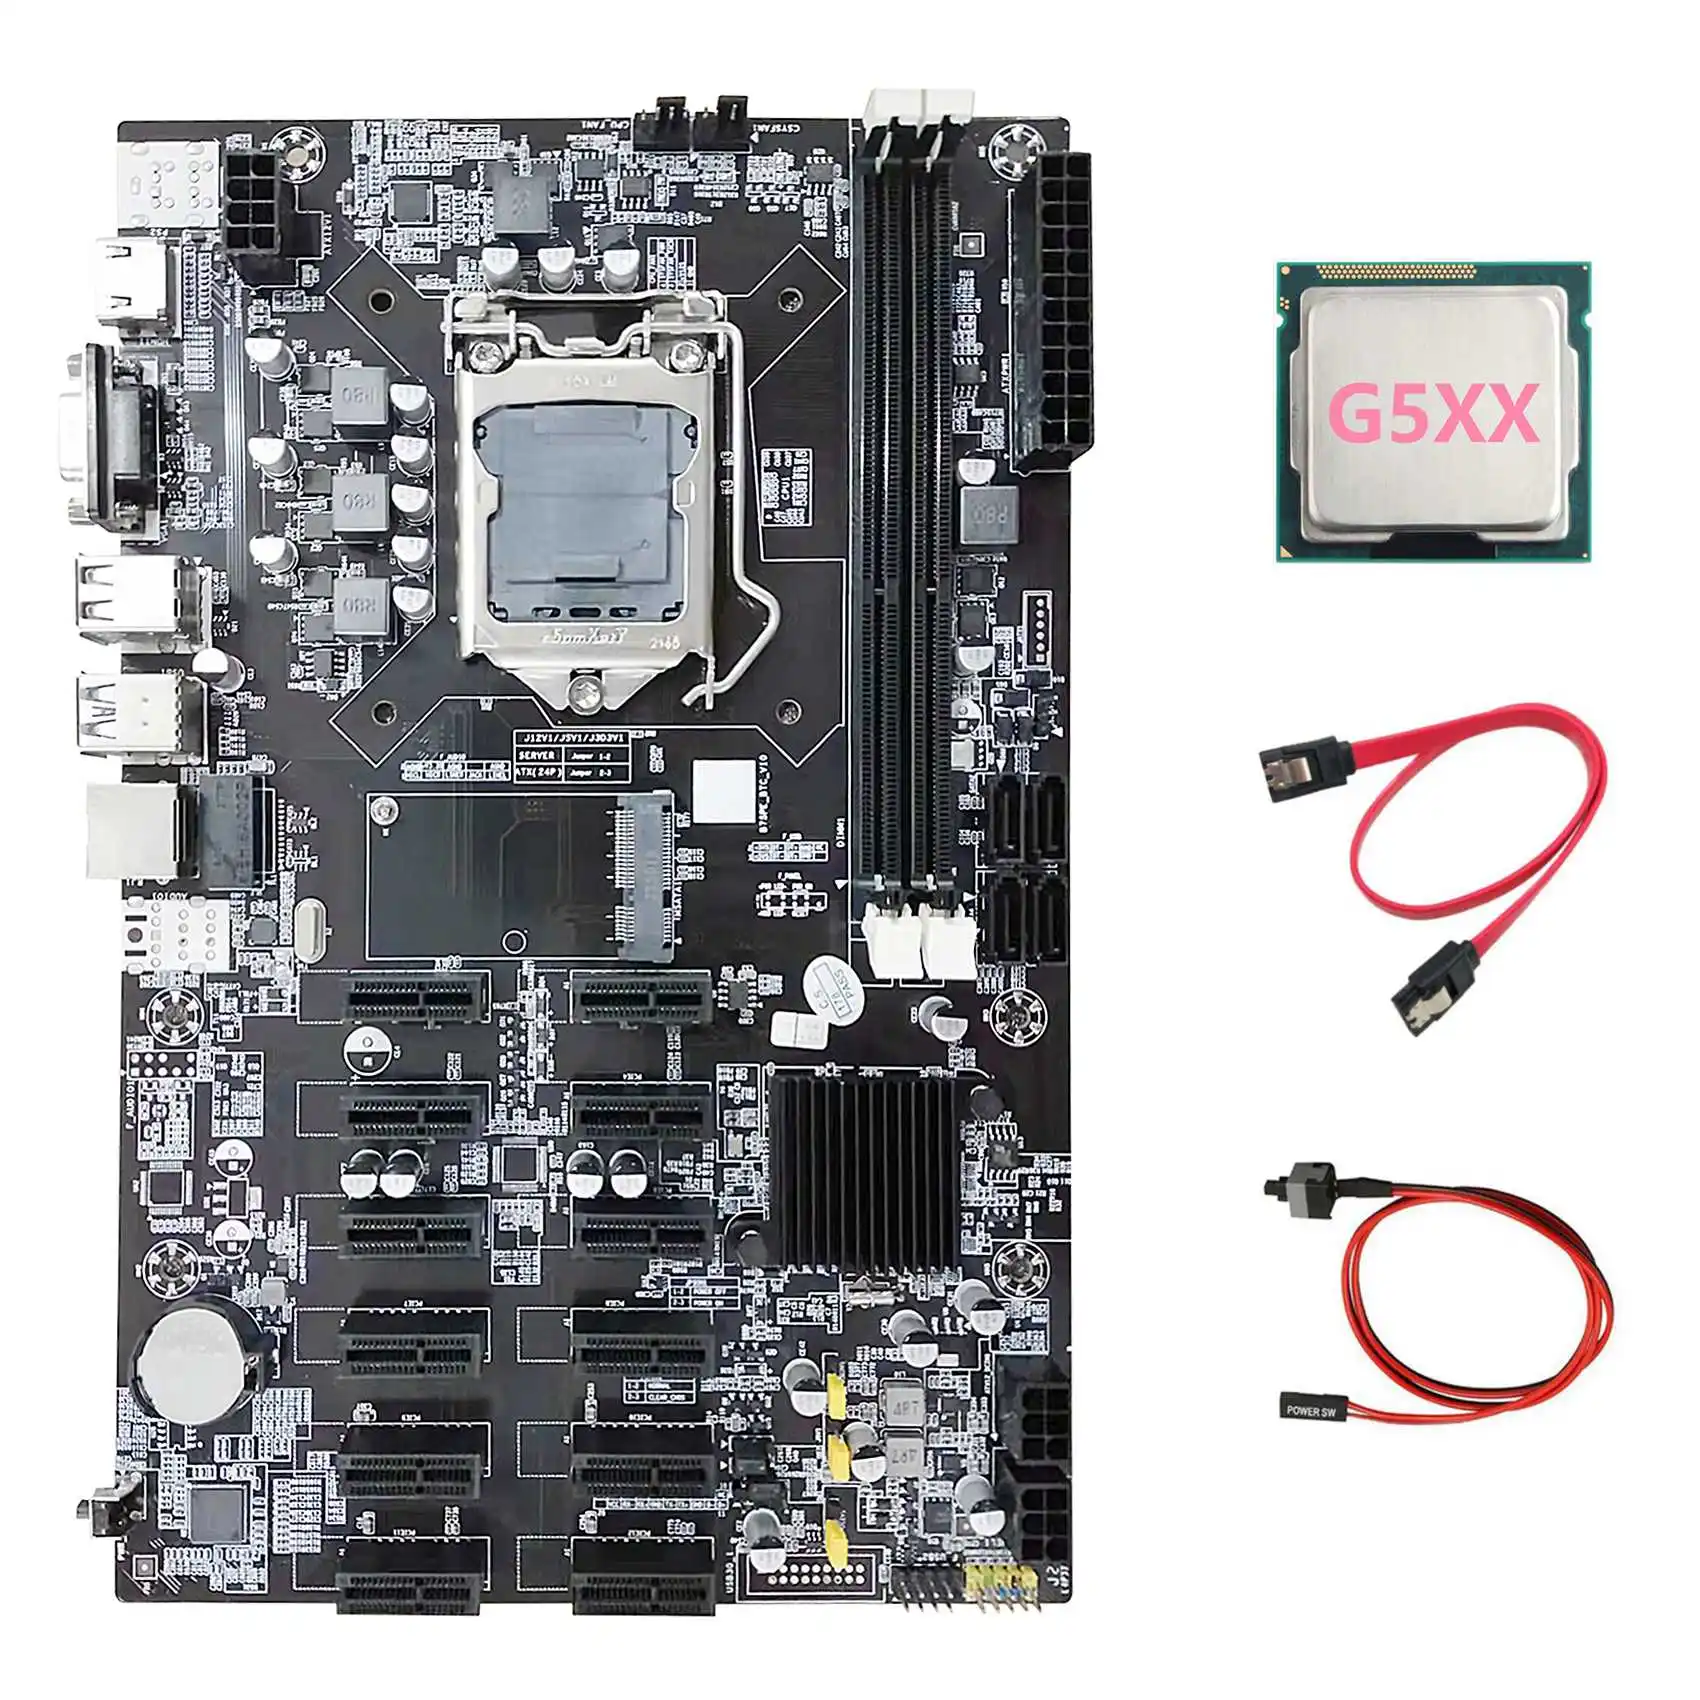 B75 ETH Mining Motherboard 12 PCIE+G5XX CPU+SATA Cable+Switch Cable LGA1155 MSATA DDR3 B75 BTC Miner Motherboard